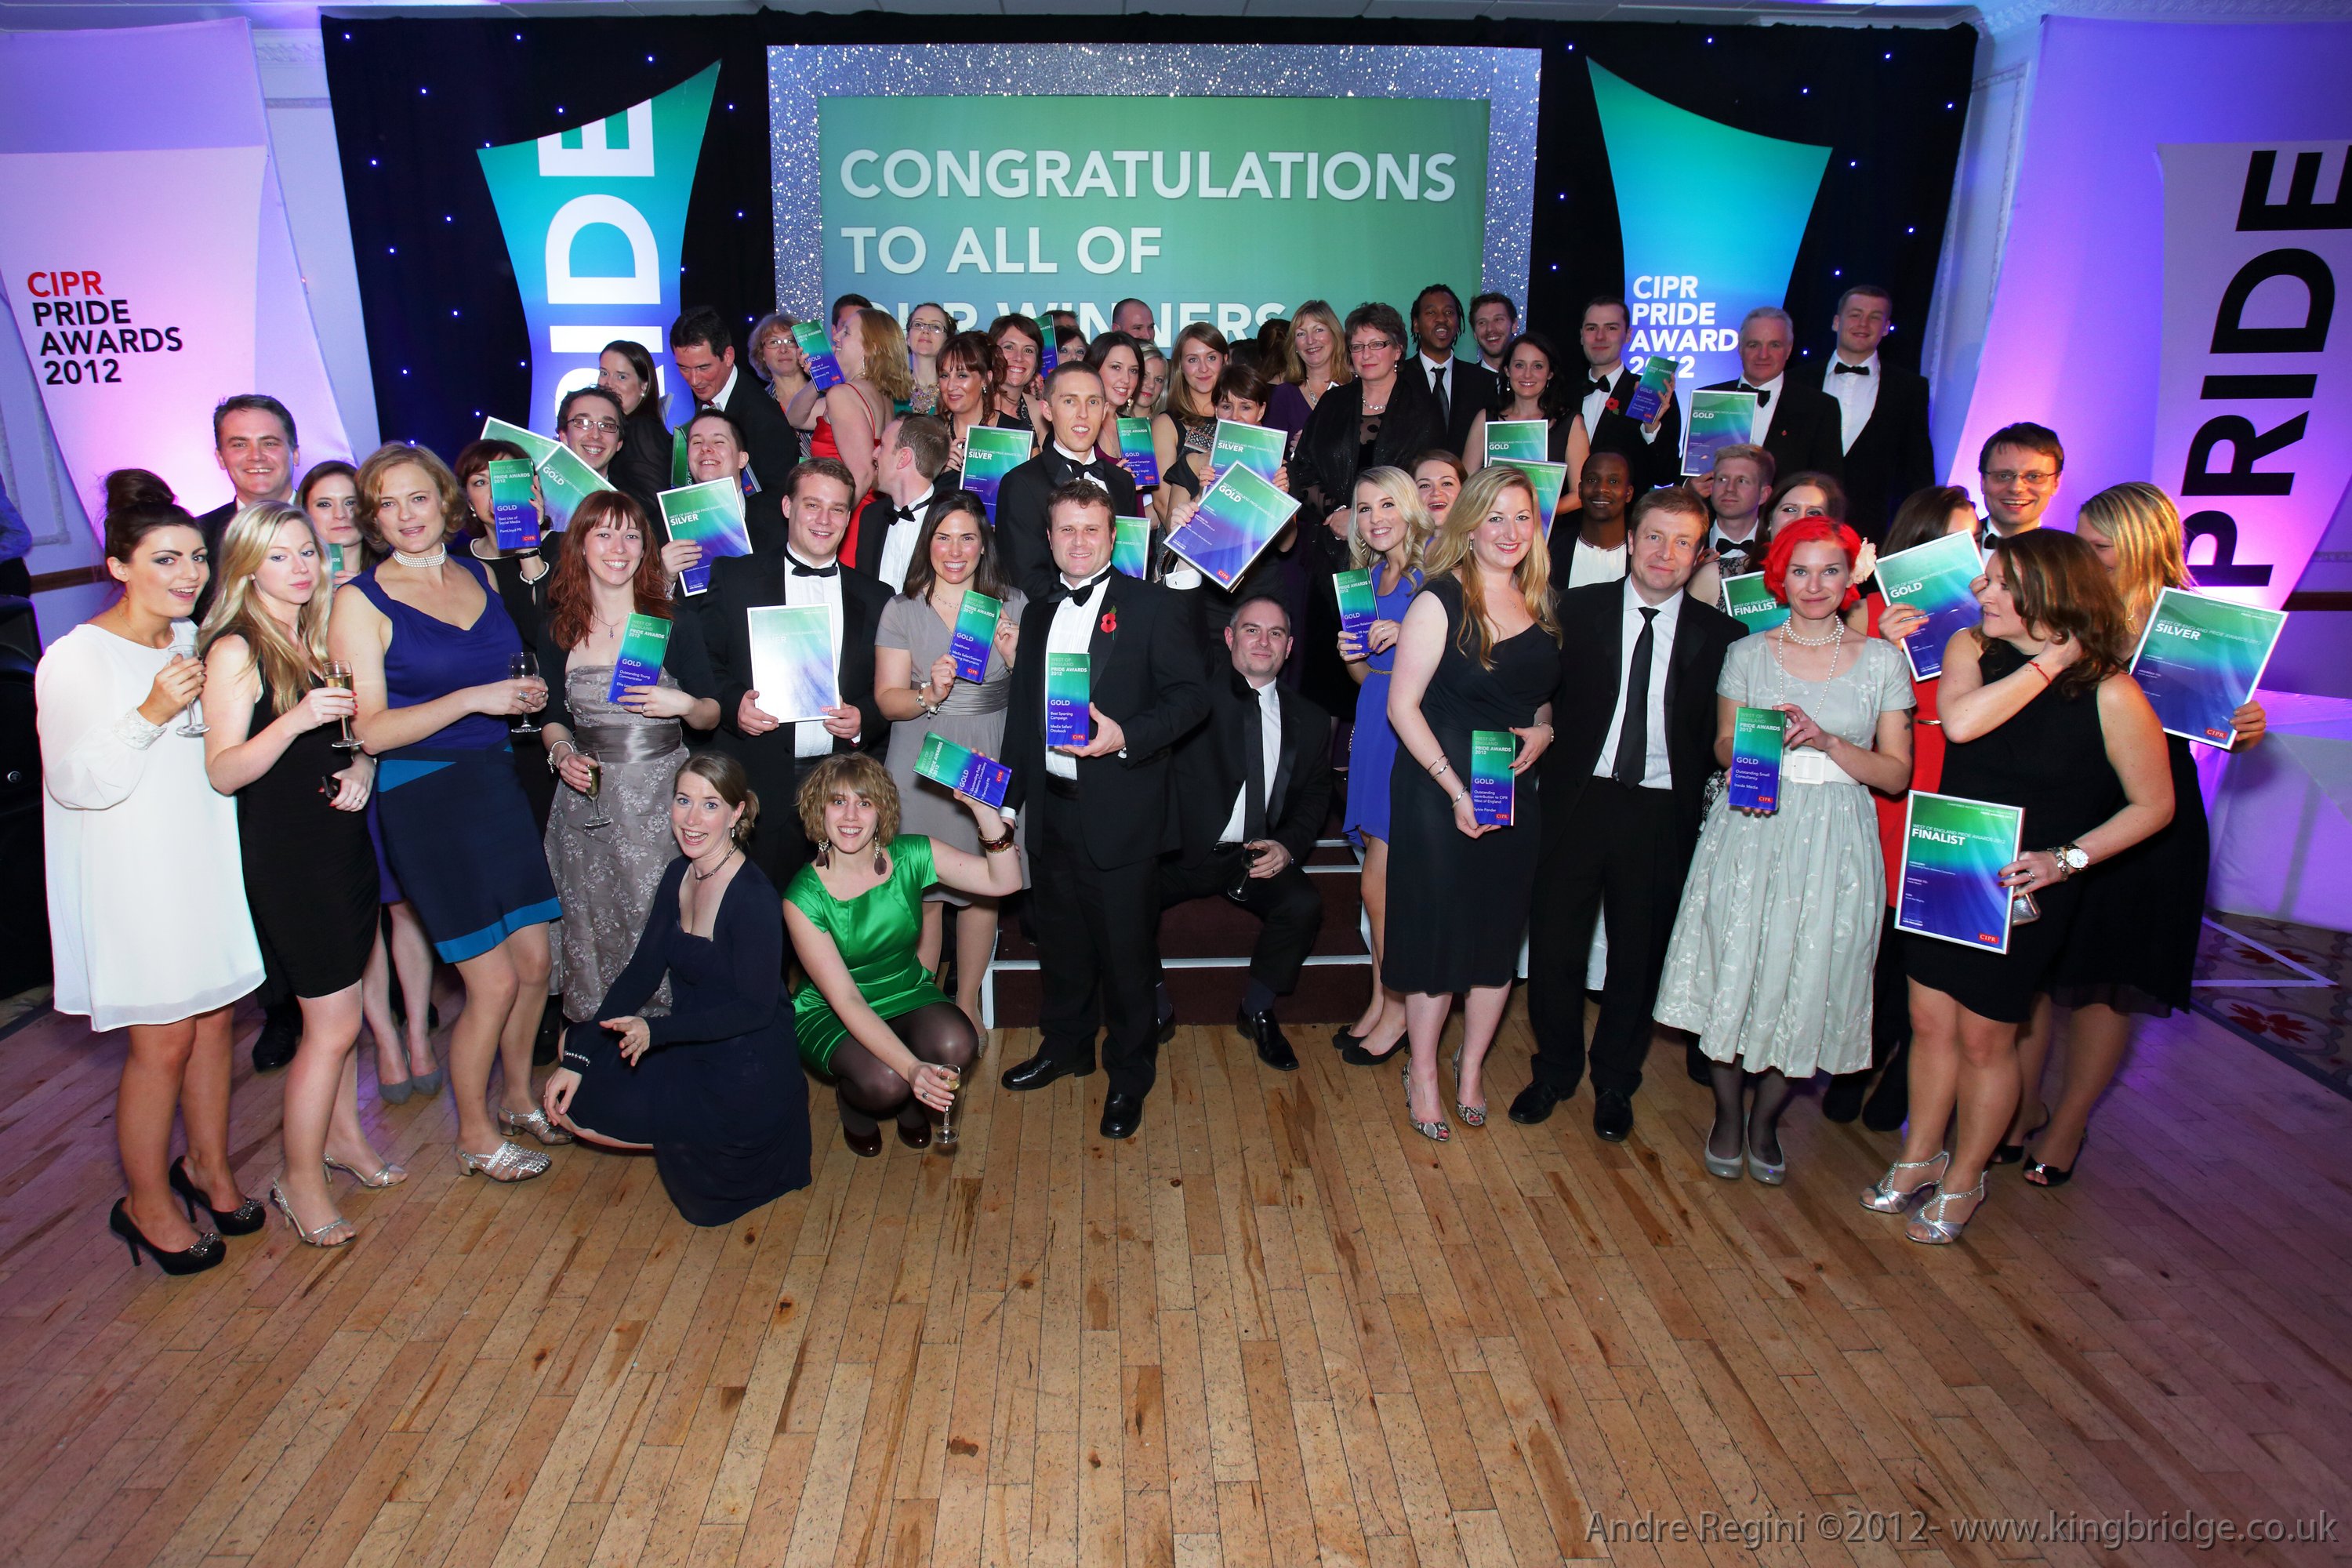 West’s top PR talent is showcased at glittering CIPR PRide Awards